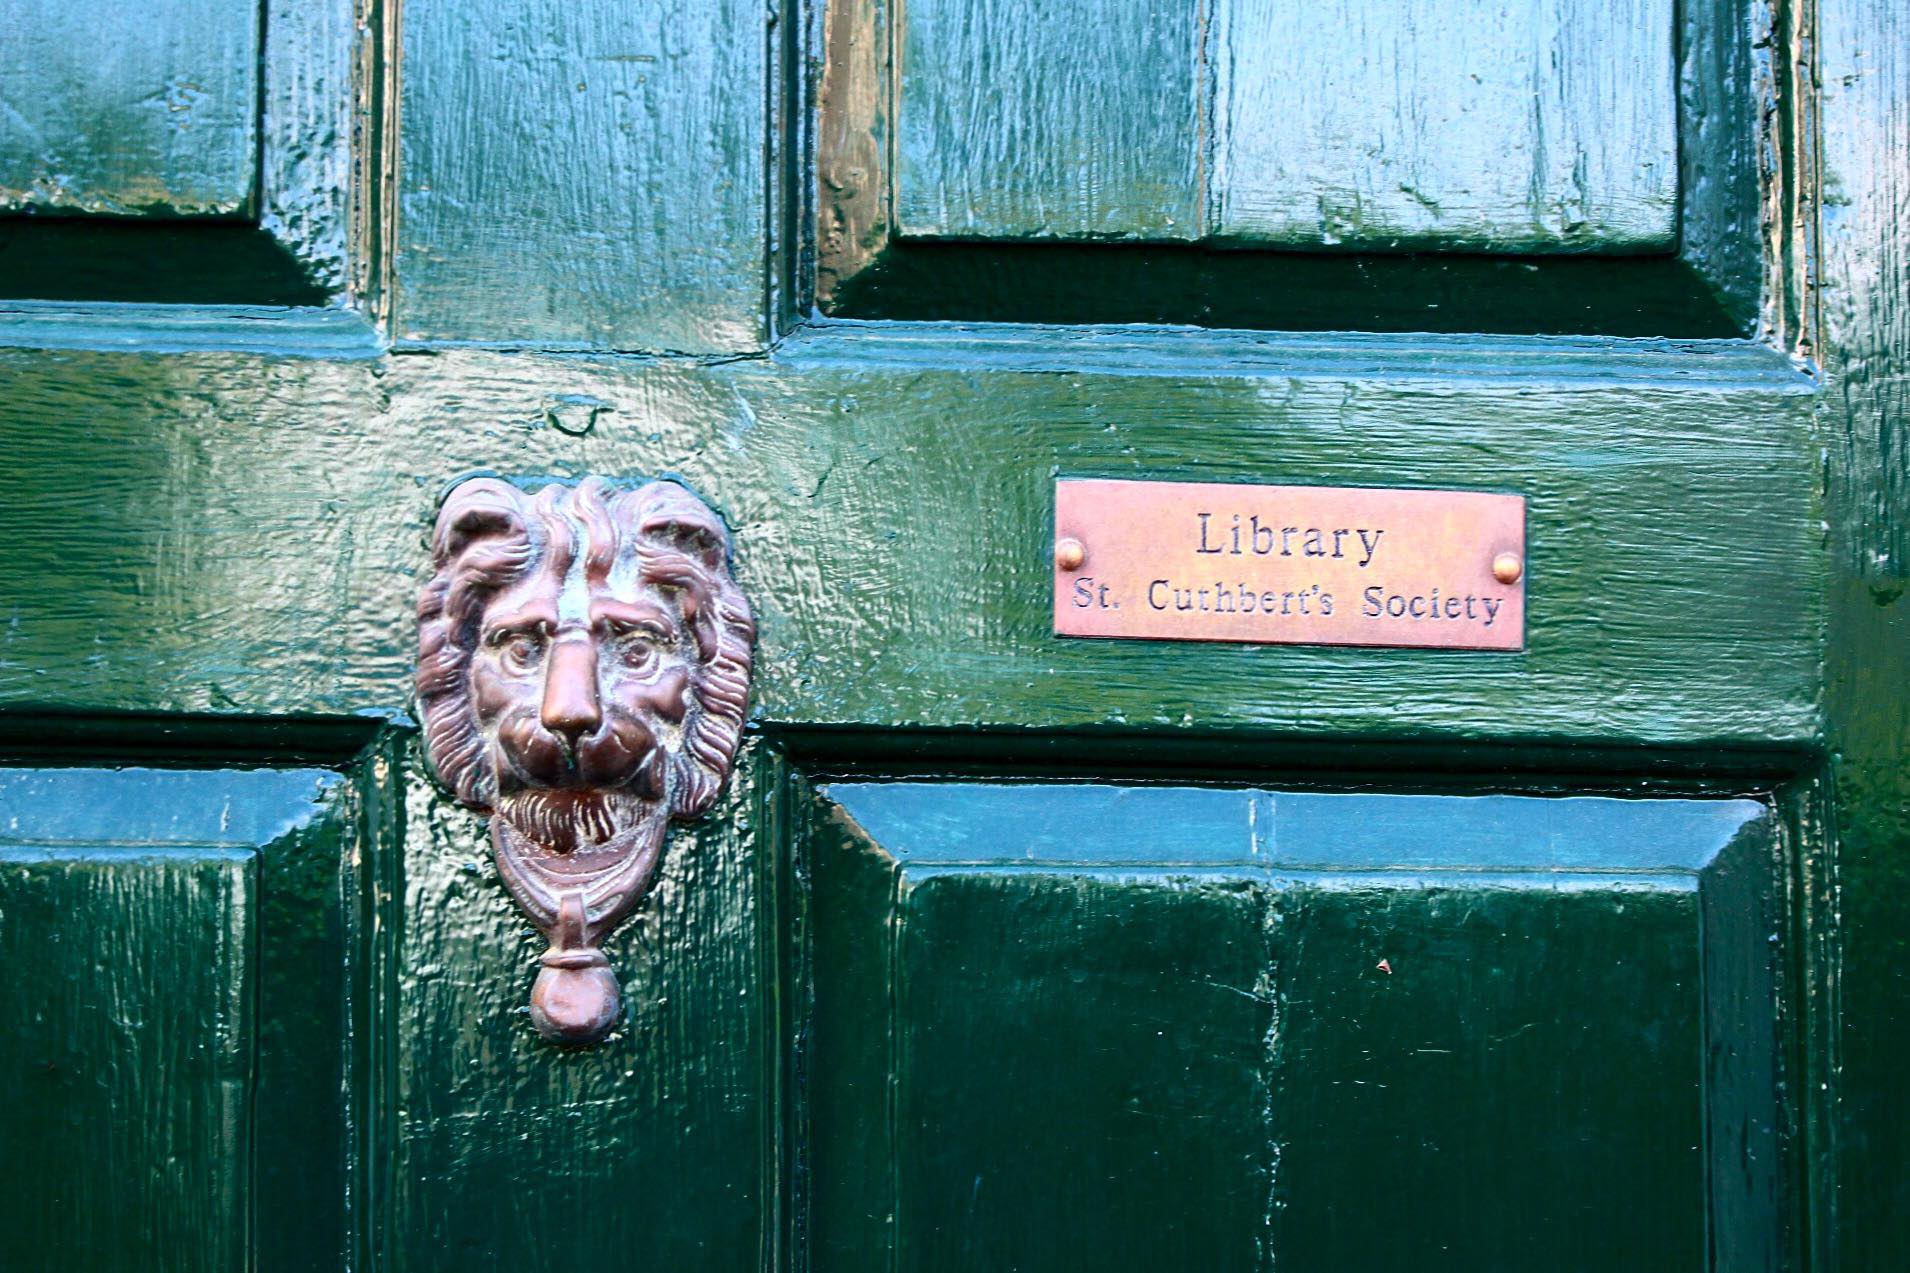 Dark green glossy wooden door with a lion knocker and St Cuthbert's Society Library plaque